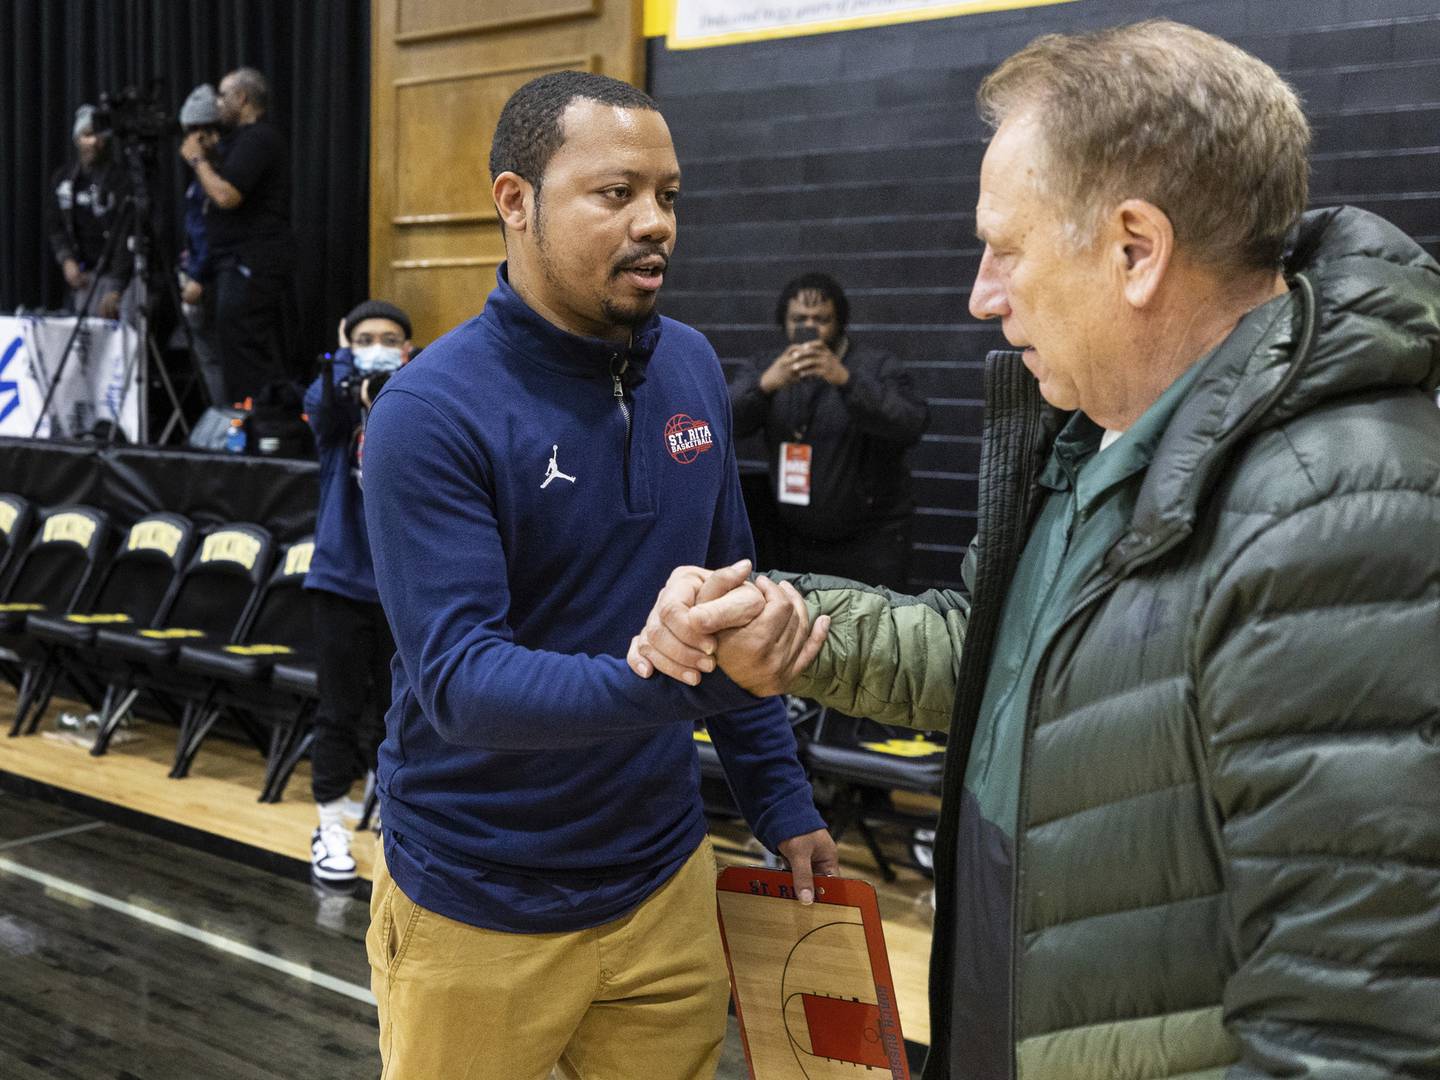 St. Rita coach Roshawn Russell, left, shakes hands with Michigan State coach Tom Izzo after a Catholic League crossover against St. Laurence in Burbank on Tuesday, Dec. 13, 2022.